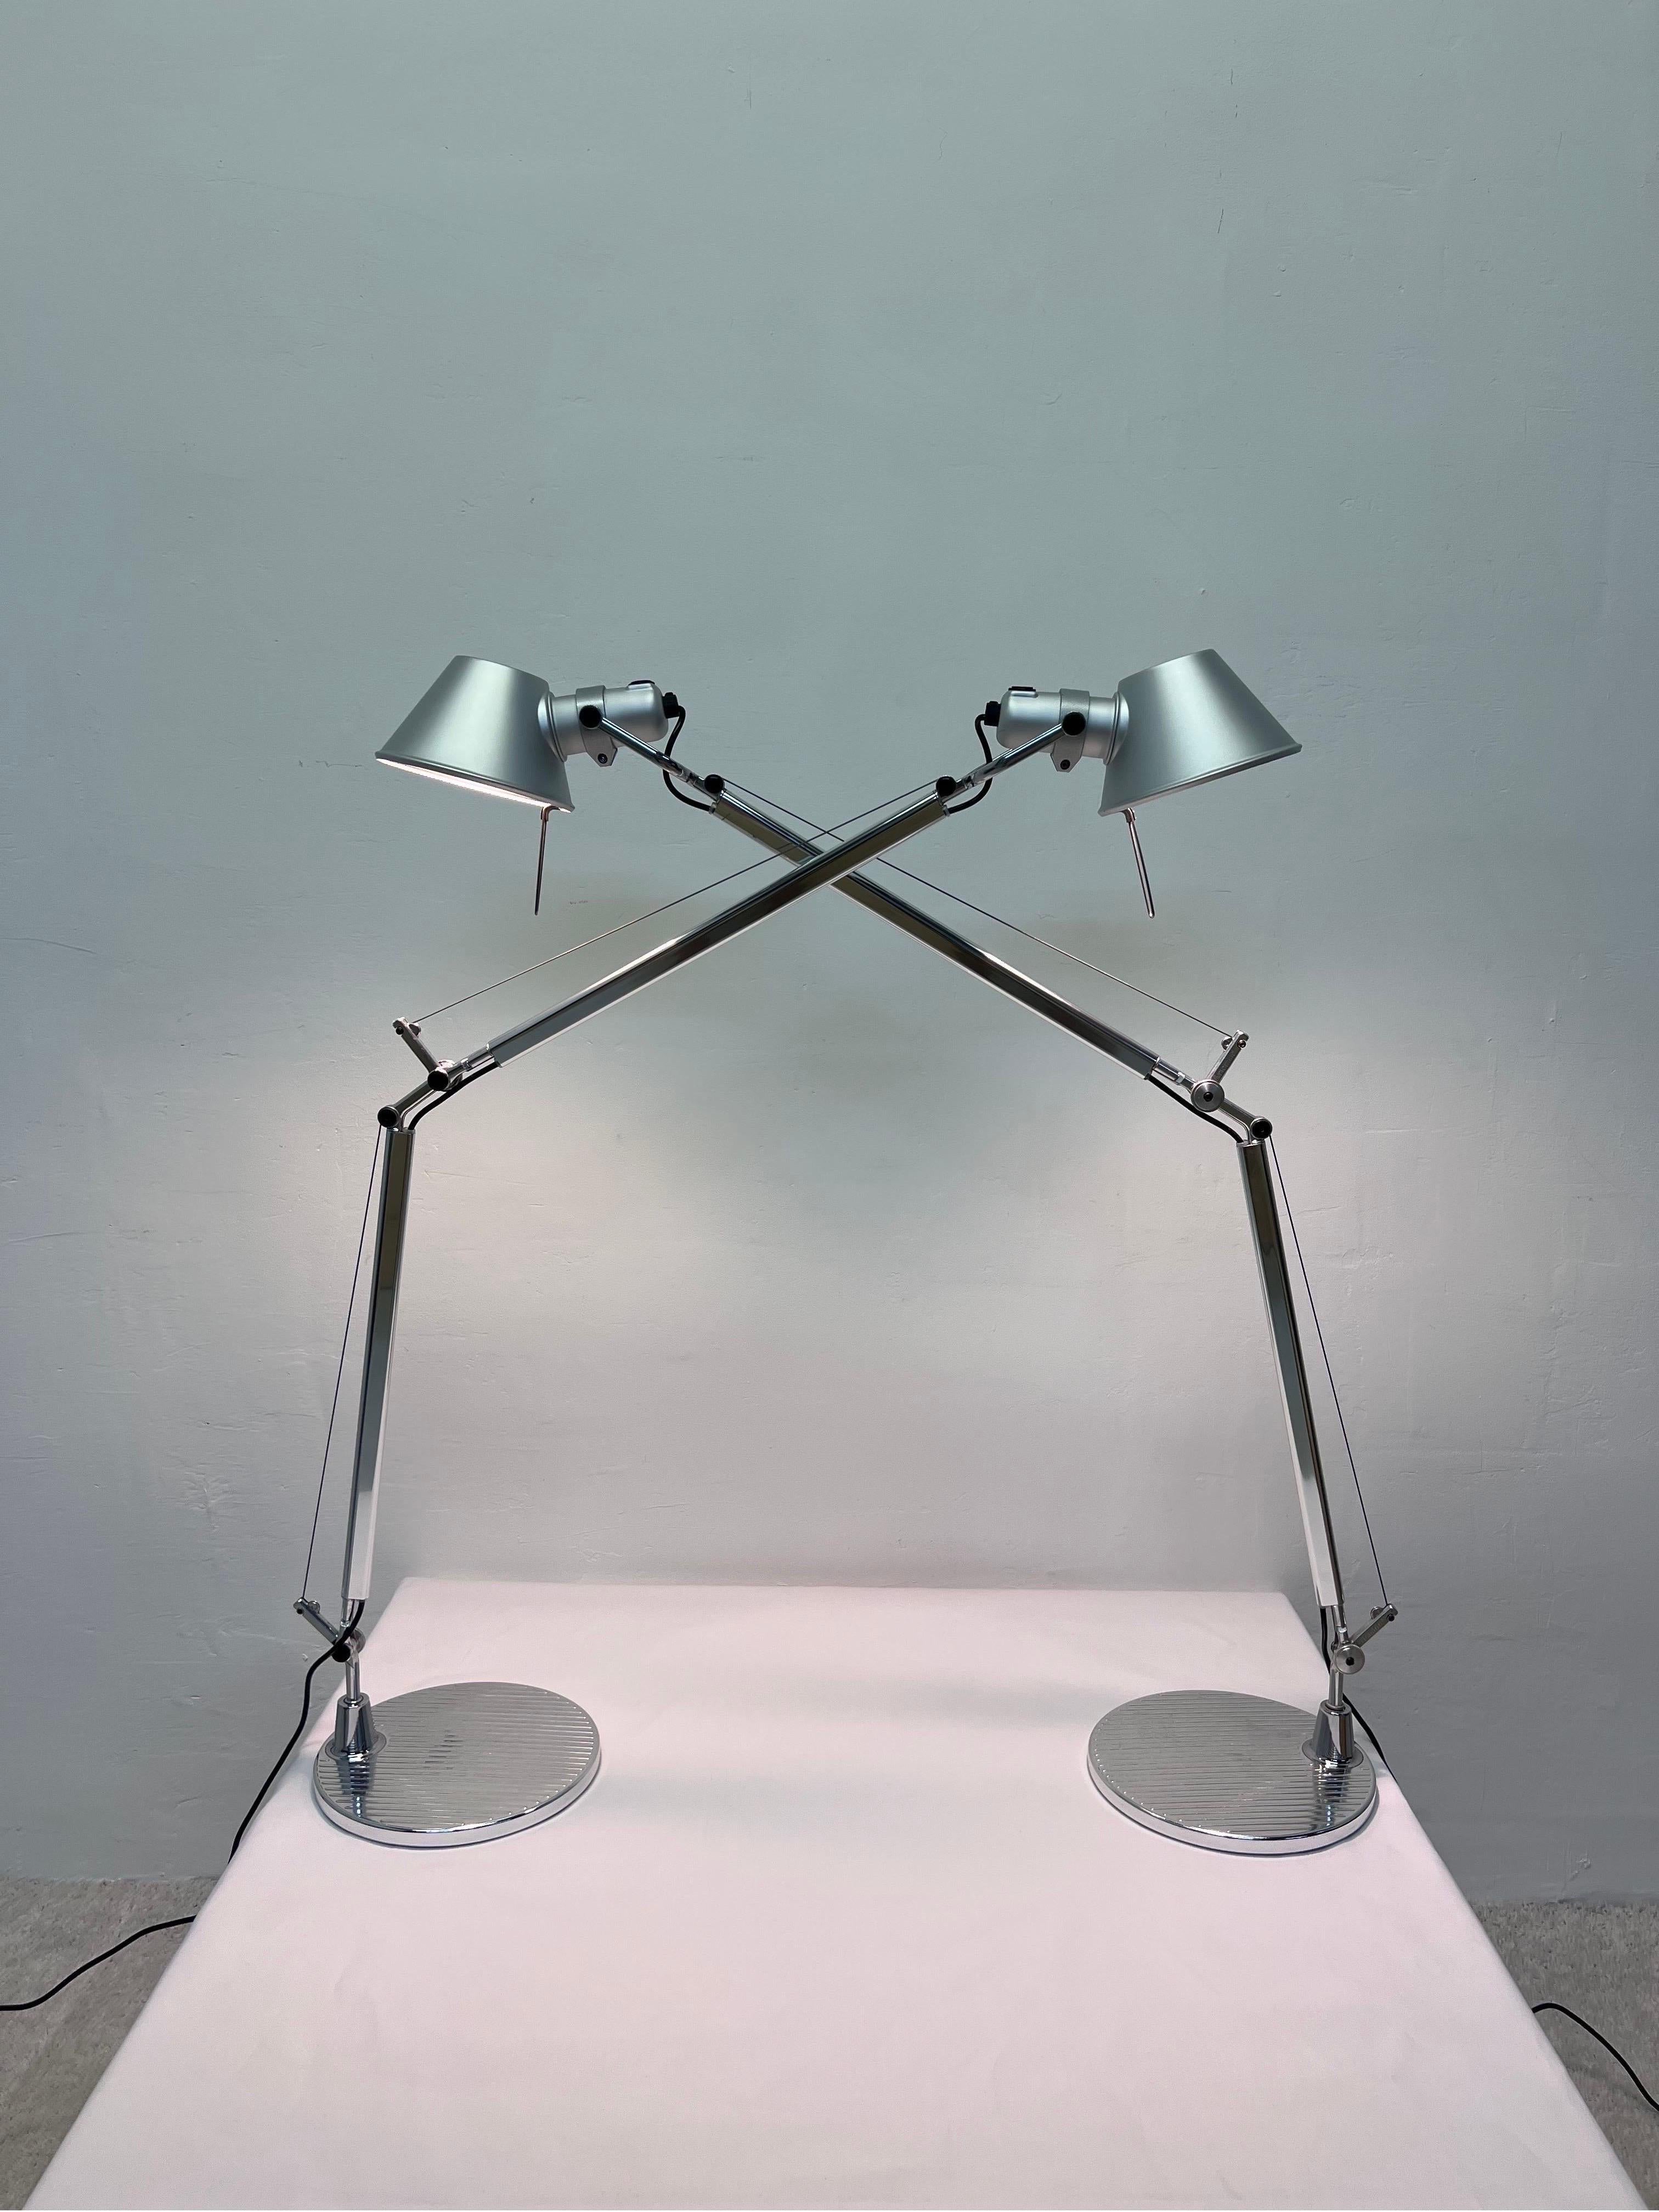 Pair of aluminum Tolomeo LED desk lamps in standard size designed by Michele De Lucchi and Giancarlo Fassina for Artemide.

Rather than develop his career within a single design discipline – be it industrial, furniture, interior, lighting or